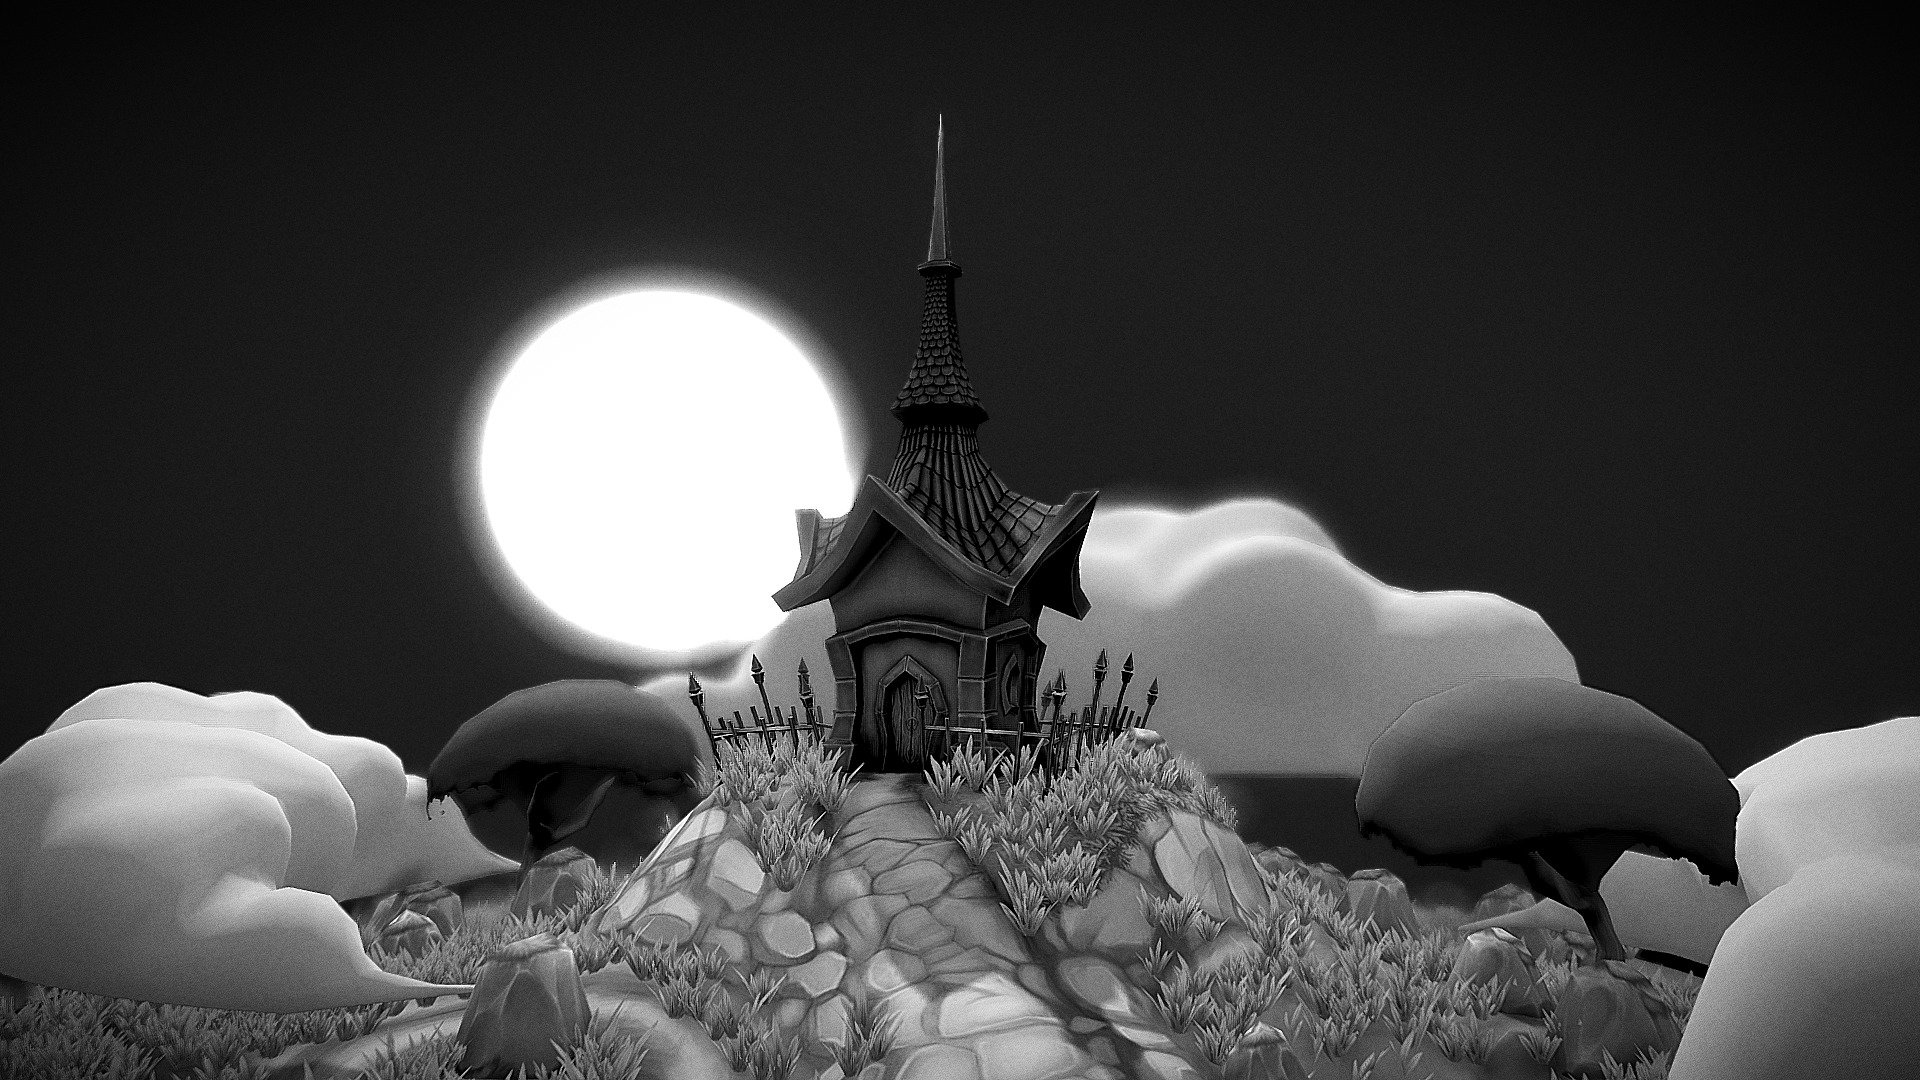 So this project began being another hand paint piece, but then I started trying post processing effects here in Sketchfab and I realized it looked quite good as a grayscale. This is the first time I use the post-processing so much, up to the point it's changing the whole final result. I'm still happy with this project.

I used Geometry nodes to spawn different elements on the ground. The leaves texture for the trees is not complete since I didn't have enough time to get into that level of detail. Made completely using Blender and Substance Painter. Hope you guys like it.

Blender #Blender3D #Blendercommunity #SubstancePainter #HandPaint #Environment #House #Crypt #Building #Architecture #Cartoon #Lowpoly #Cute - Lonely Crypt - Stylized Diorama - 3D model by P3D (@PelpesElSabio) 3d model